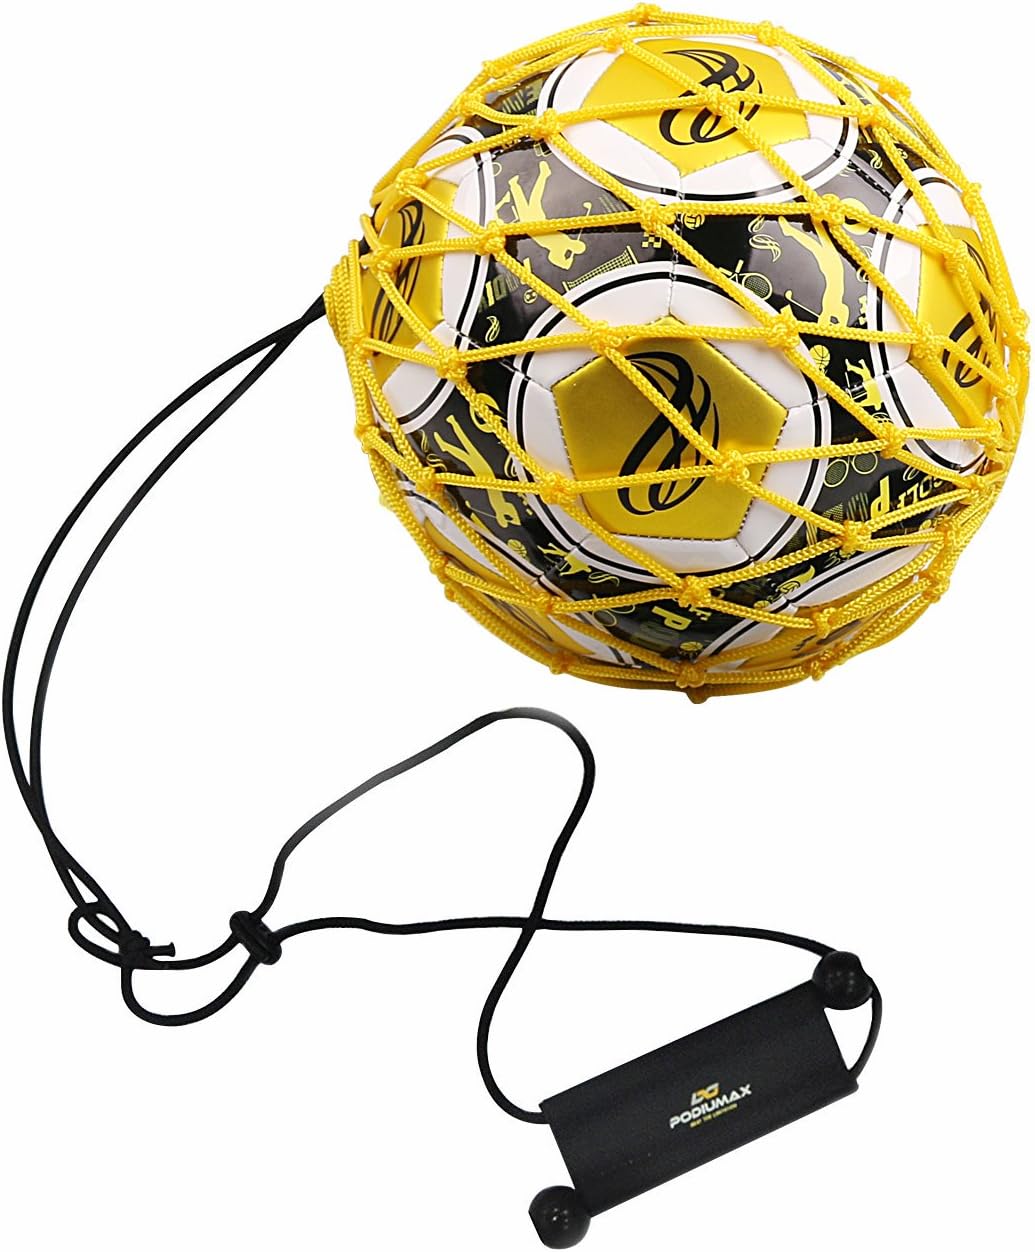 PodiuMax Handle Solo Soccer Kick Trainer with New Ball [...]